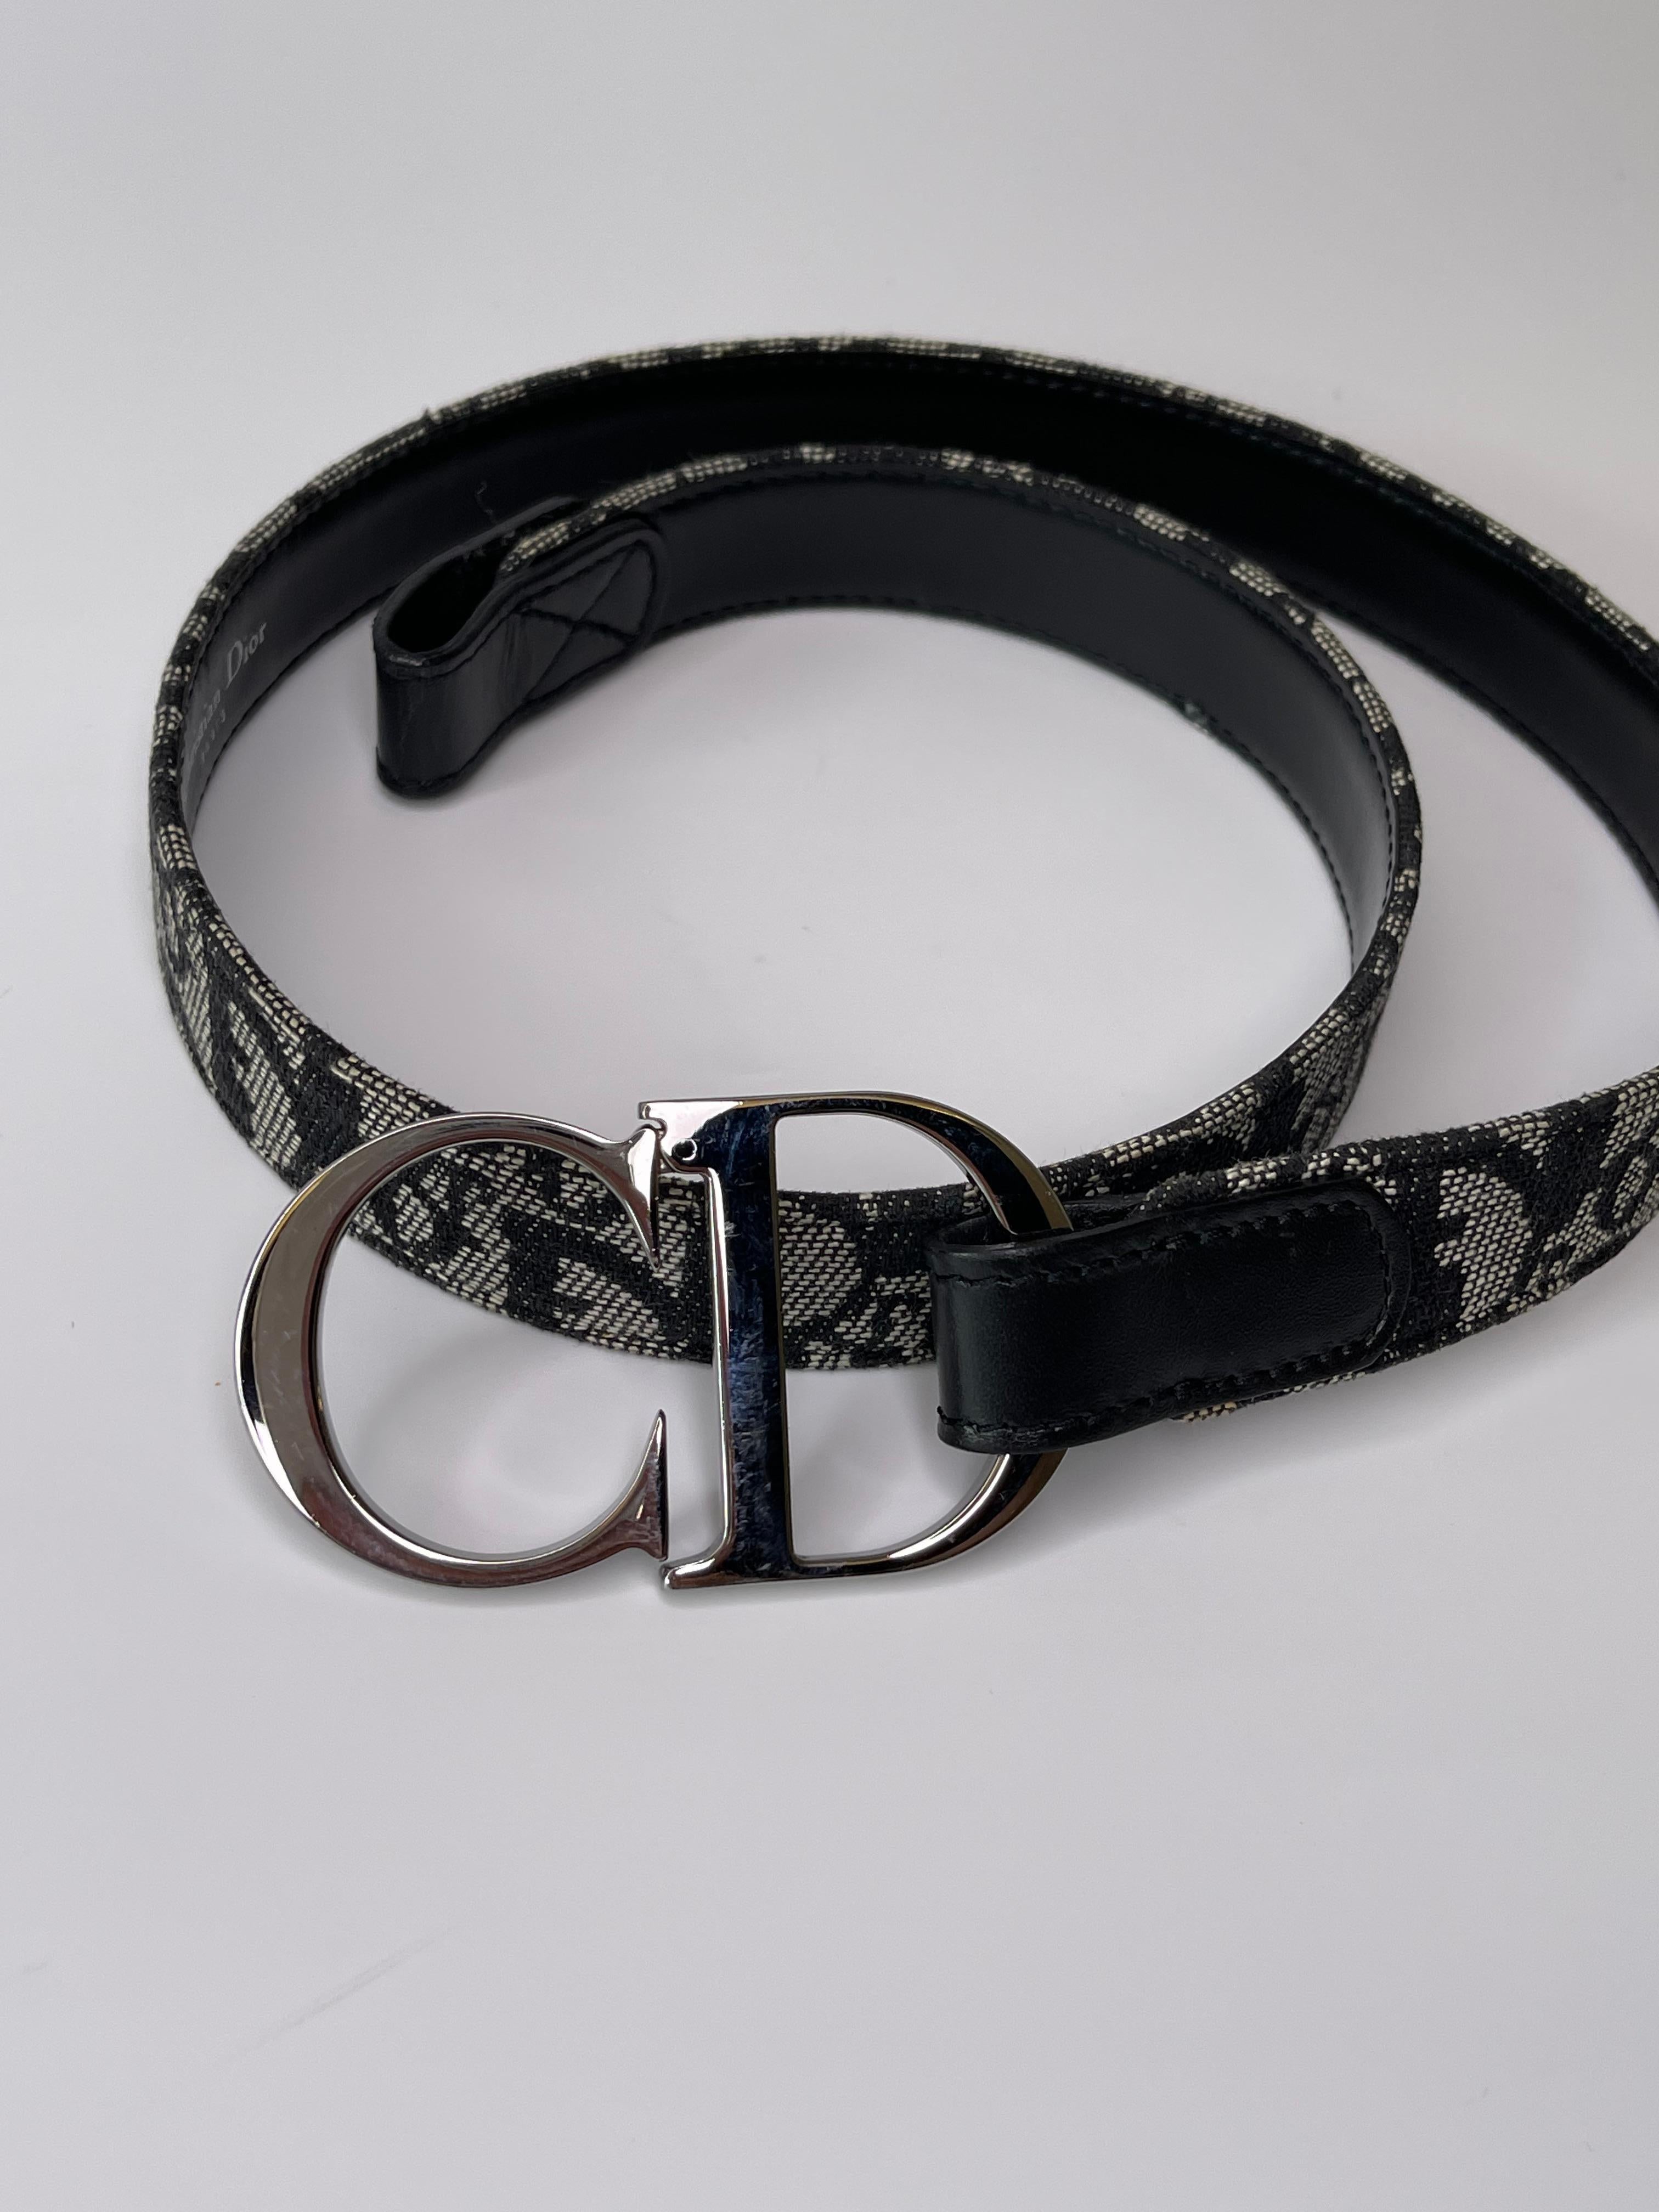 This Dior trotter pattern belt is made of leather and canvas and consists of a large silver tone buckle of the CD logo. Dior logo located throughout the belt. 

COLOR: Black and white
MATERIAL: Leather and canvas
ITEM CODE: RI0015
MEASURES: L 33” x